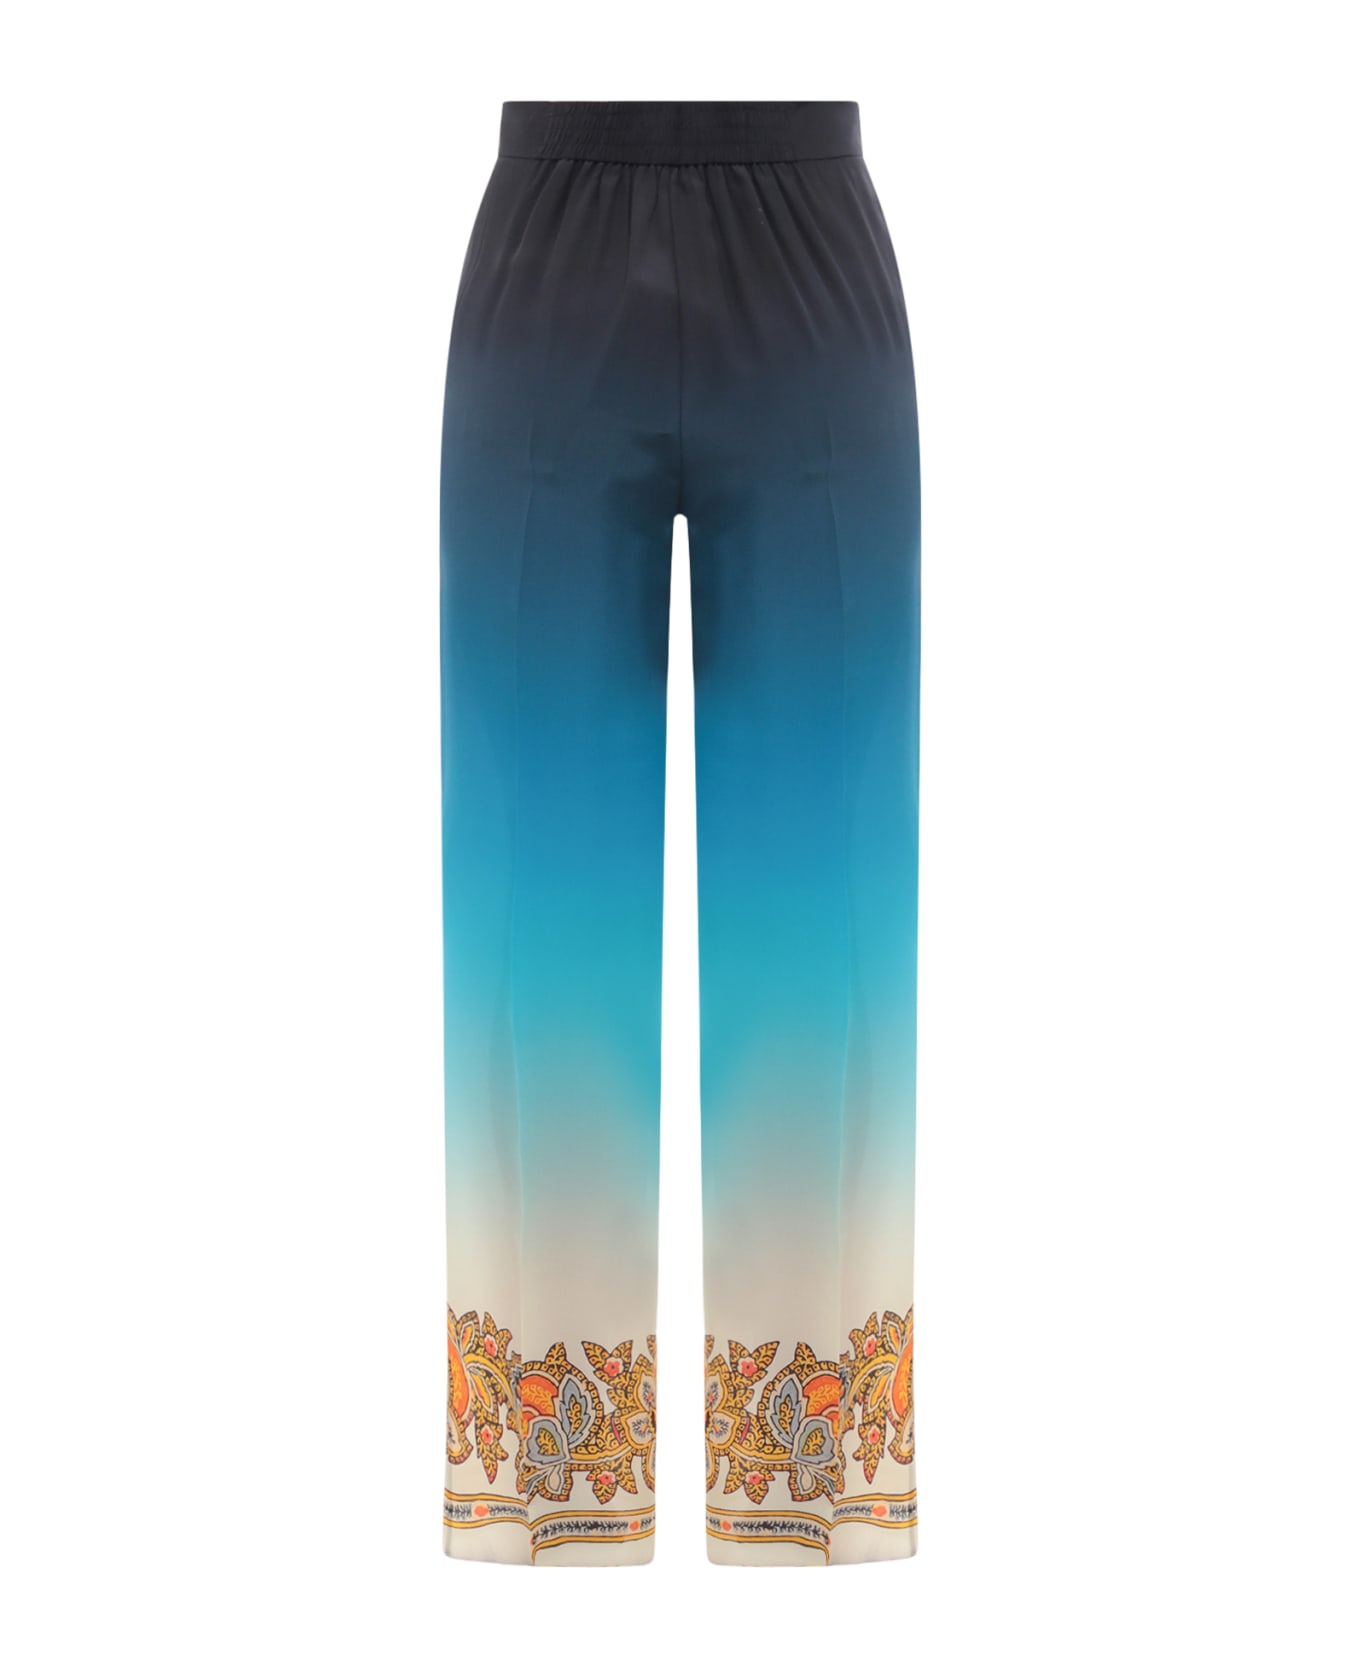 Etro Blue Palazzo Trousers In Shaded Crepe De Chine With Paisley Patterns - Blue